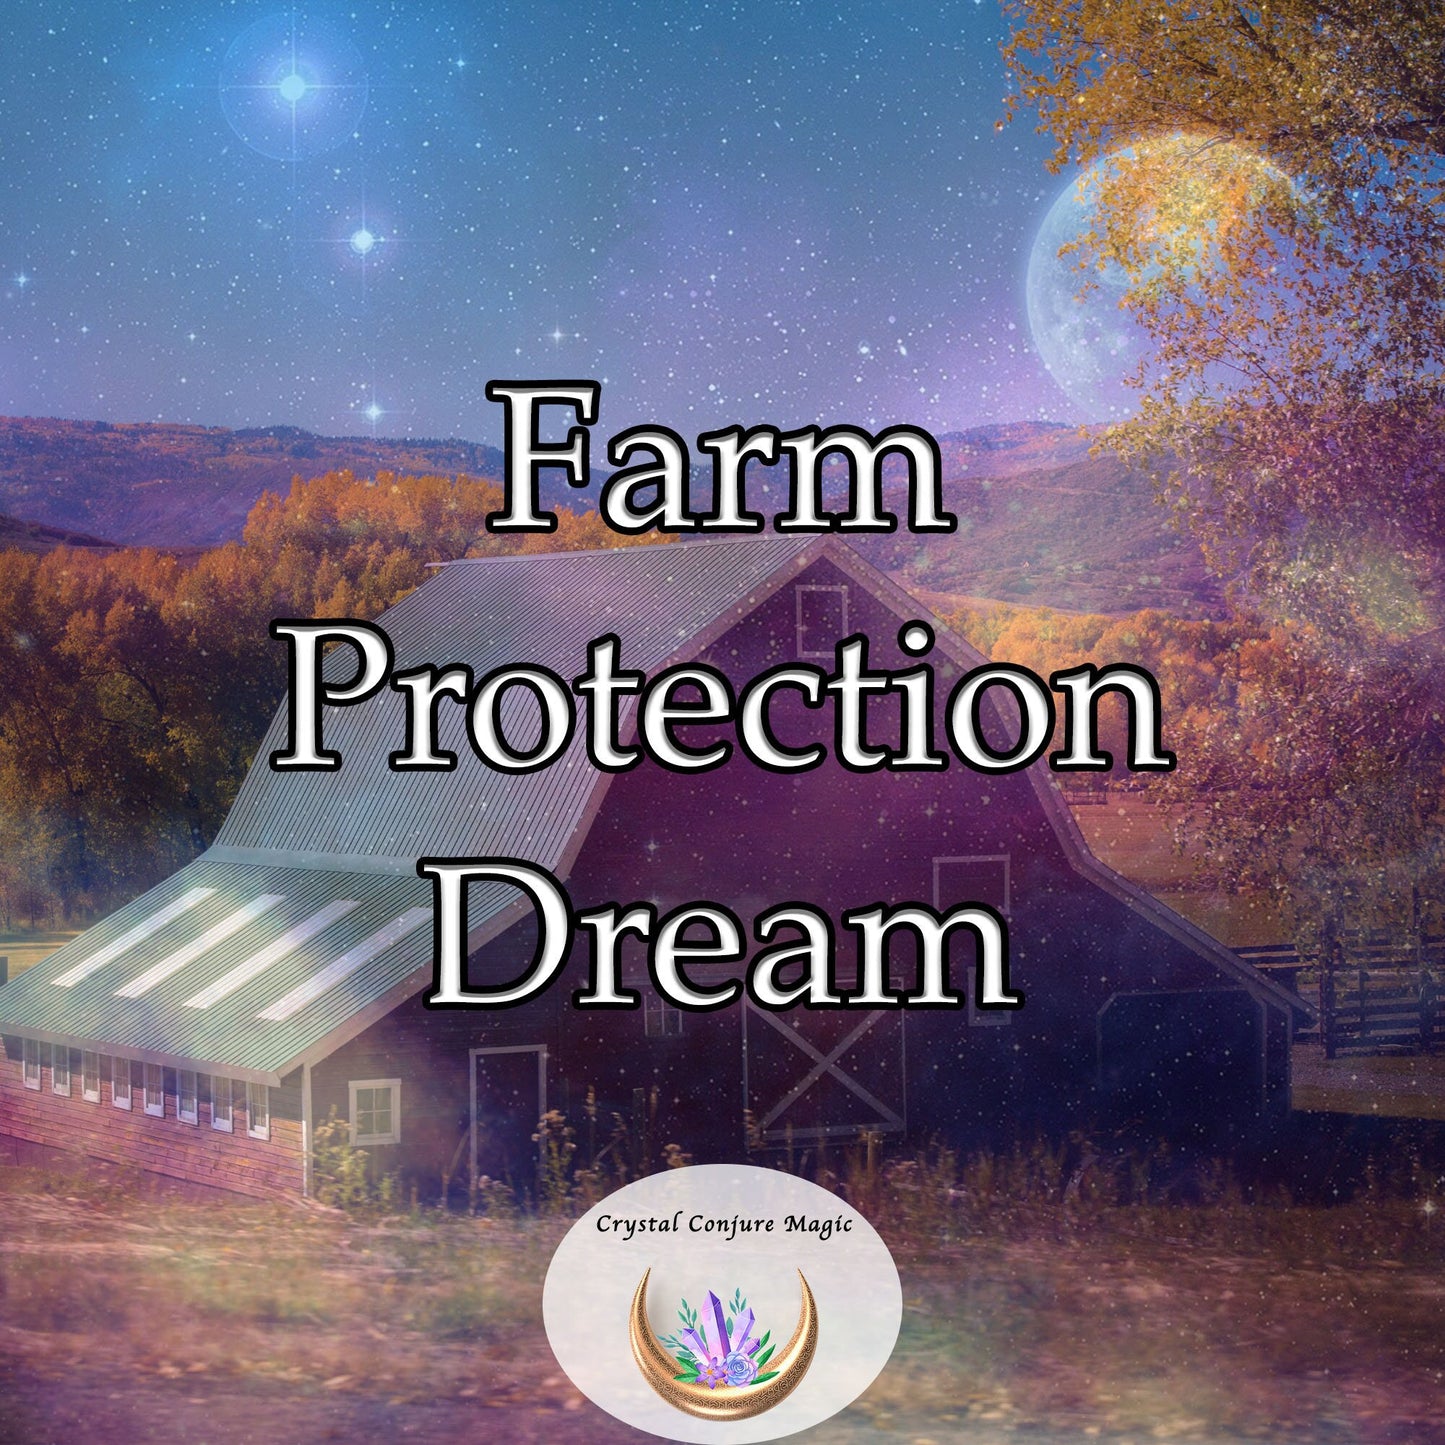 Farm Protection Dream - create a shield around your farm, repel negative energy and malintent